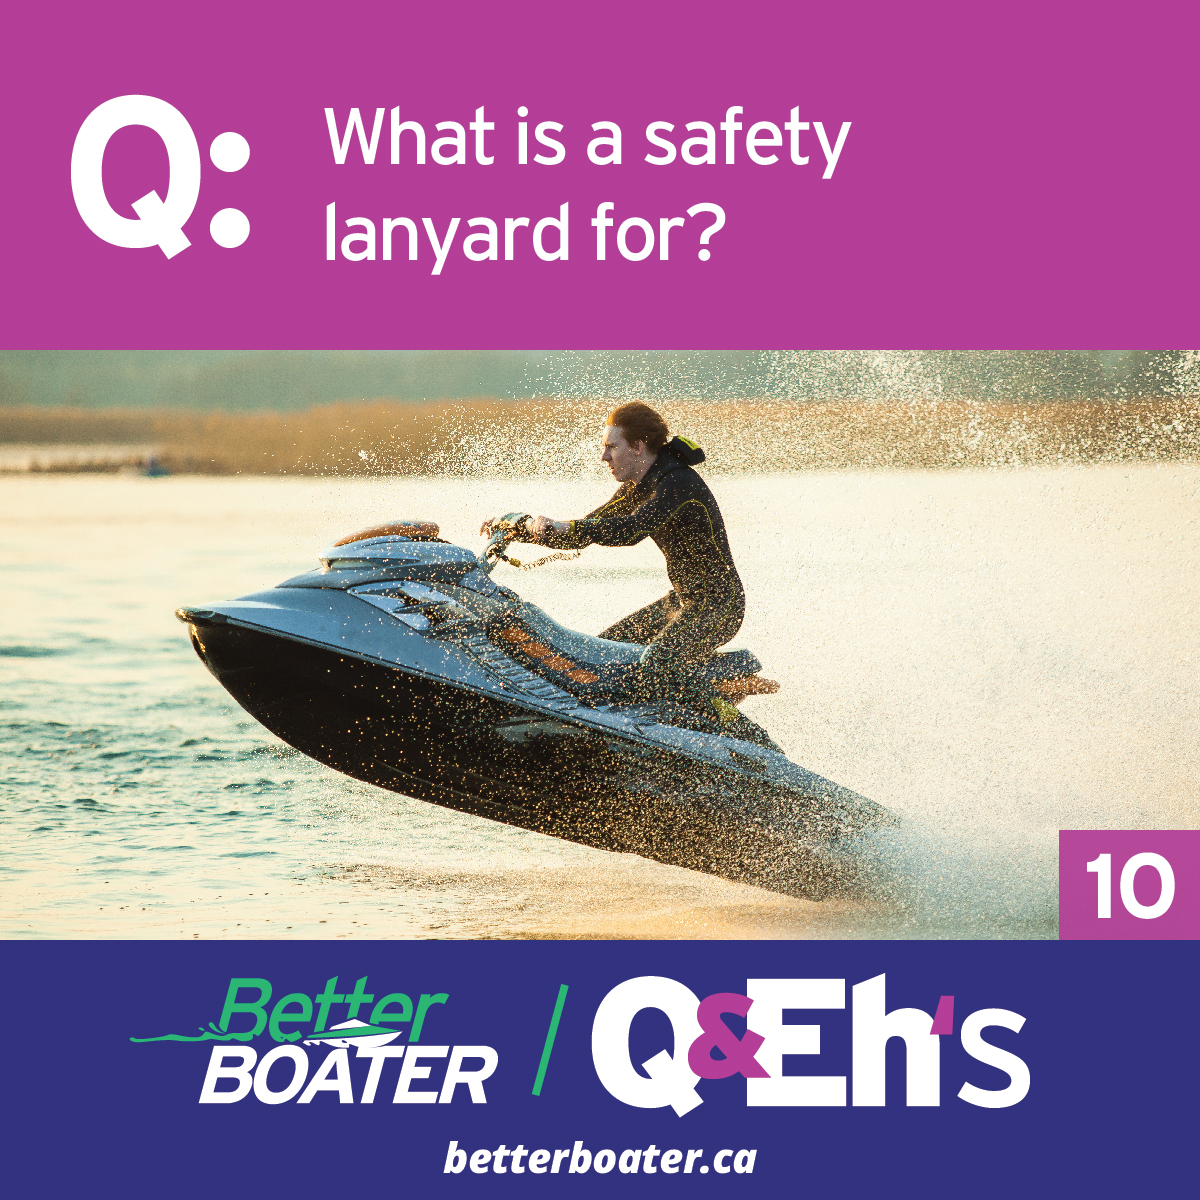 https://betterboater.ca/Safety%20Lanyard